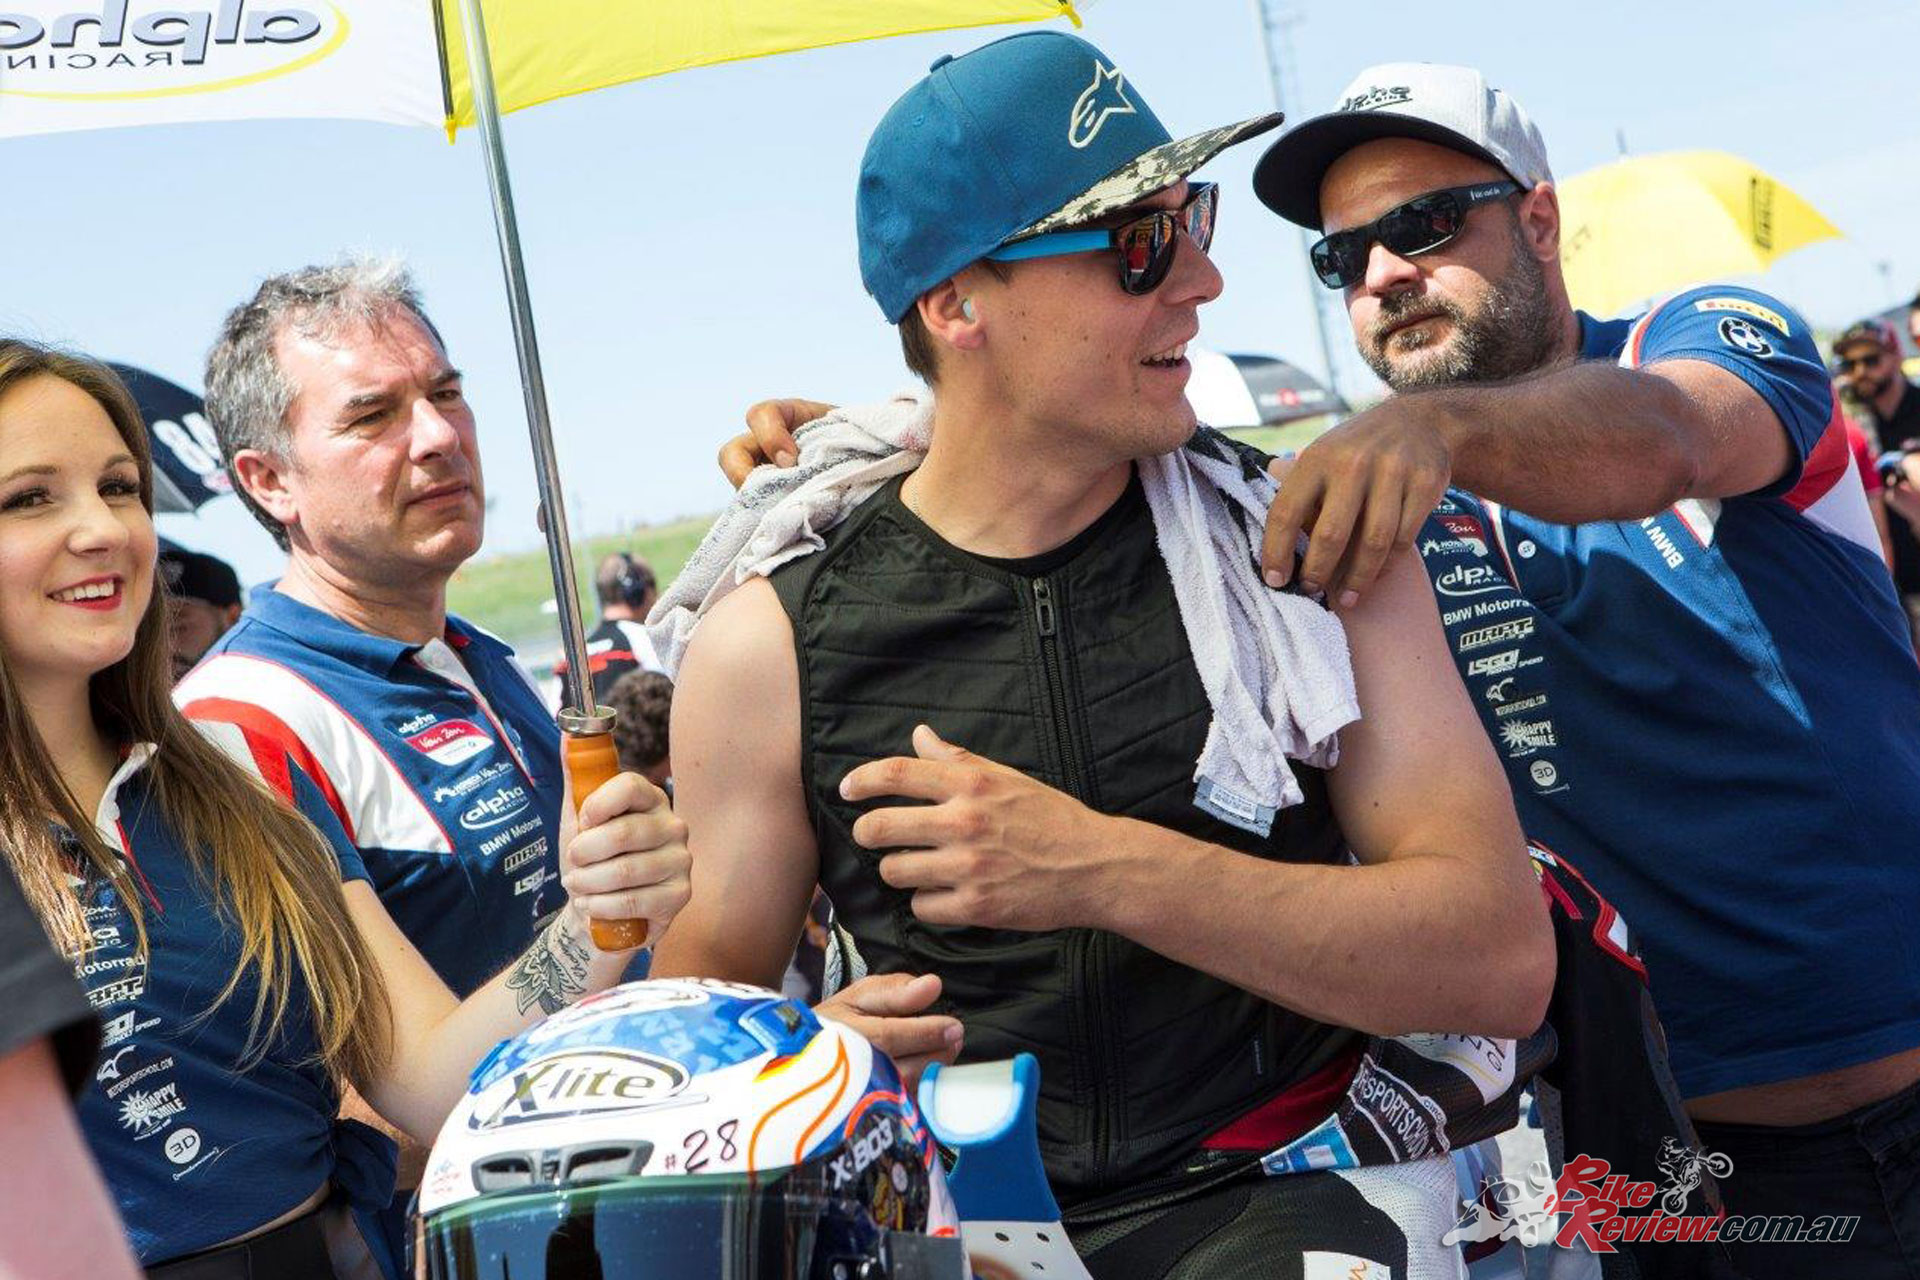 Markus Reiterberger heads to BMW - Image by Geebee